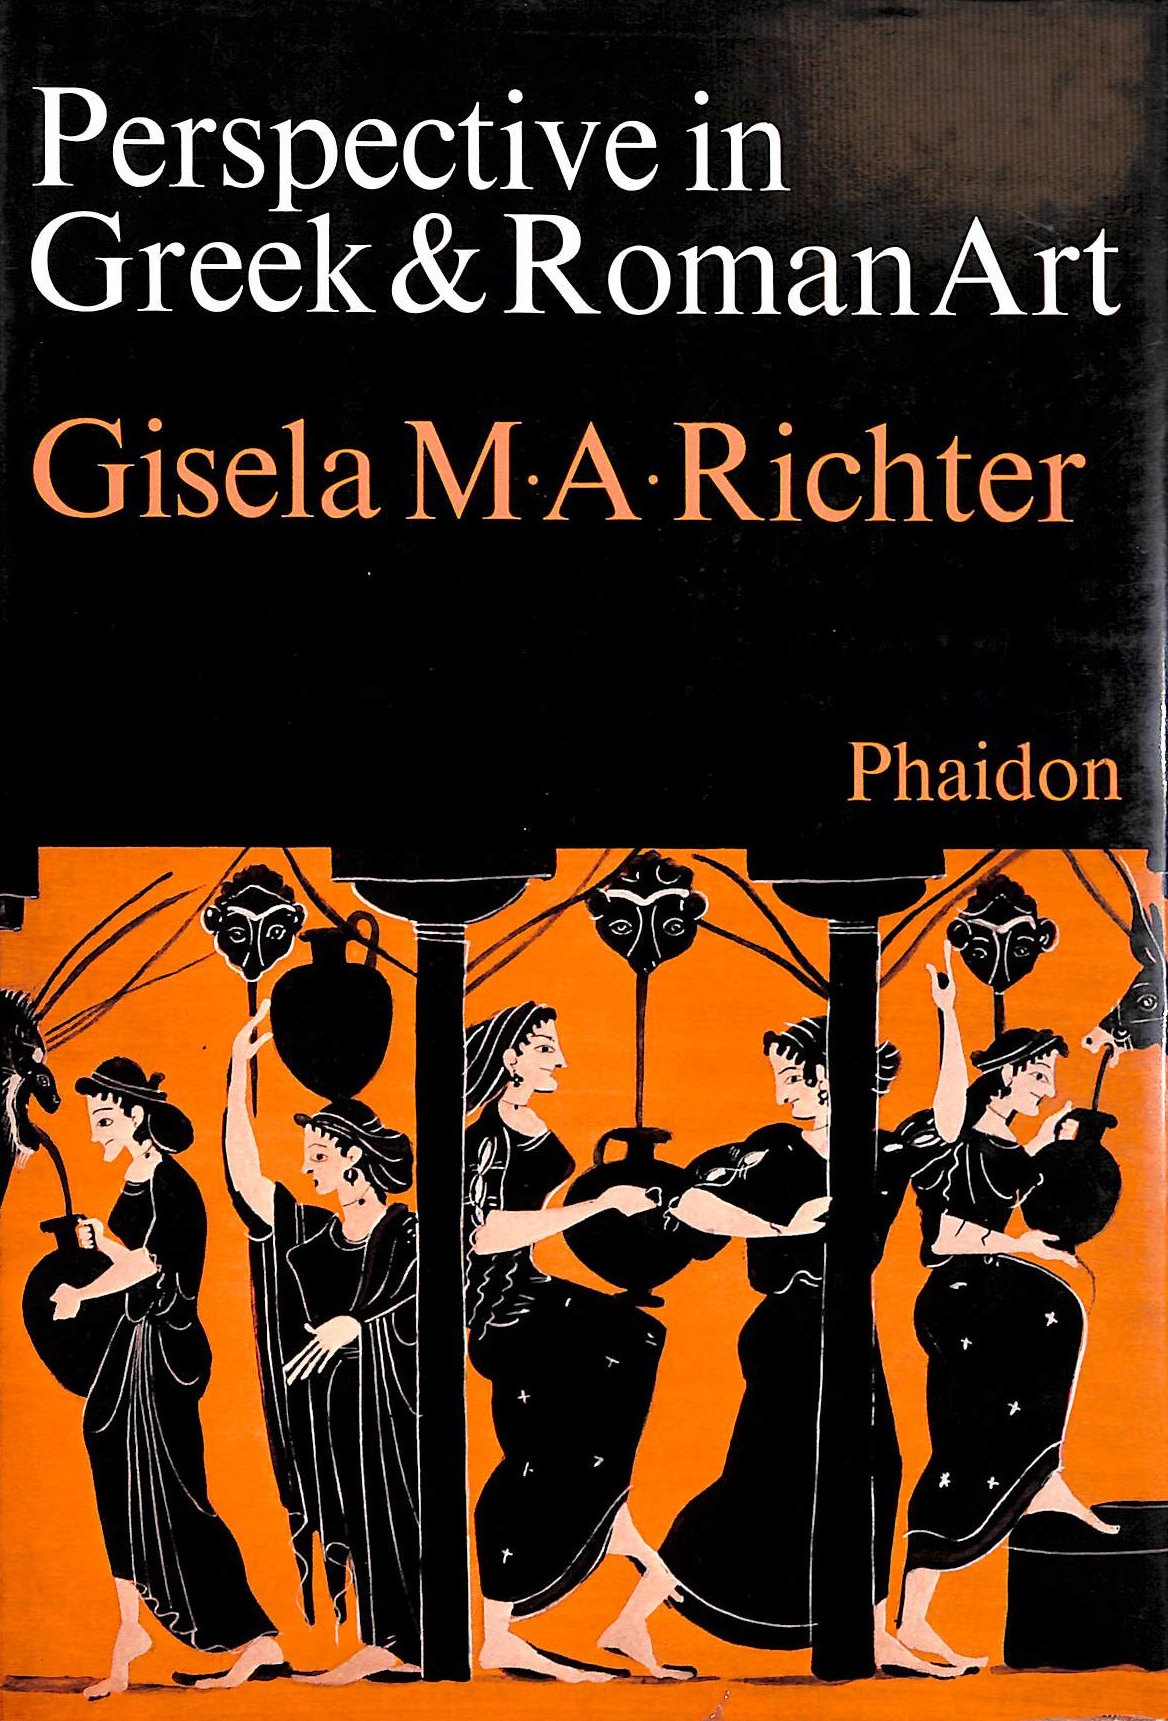 RICHTER, GISELA M.A. - Perspective in Greek and Roman Art